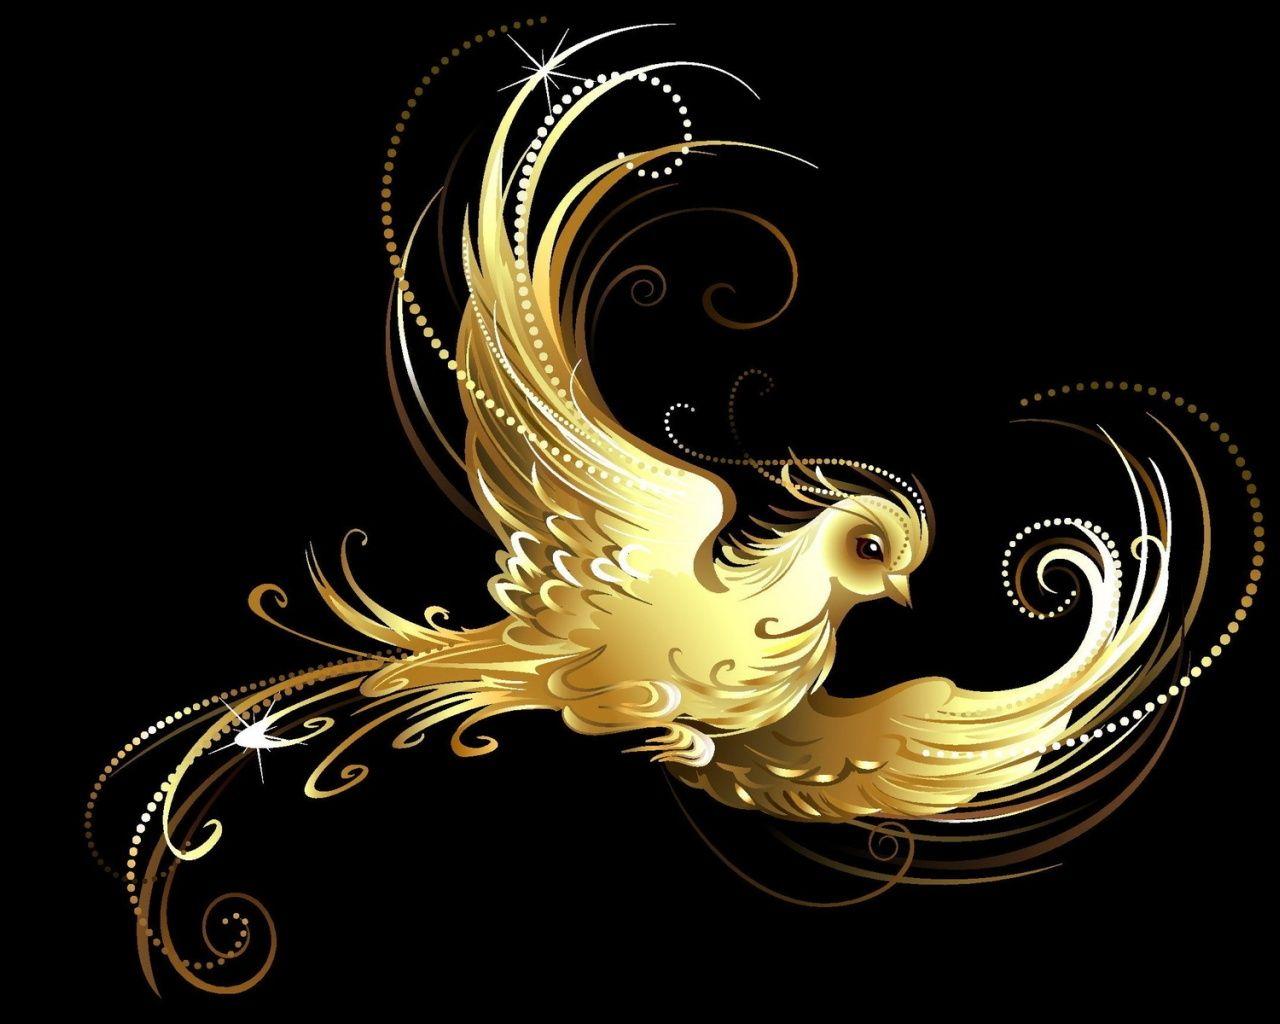 Abstract Bird Wallpapers - Top Free Abstract Bird Backgrounds ...